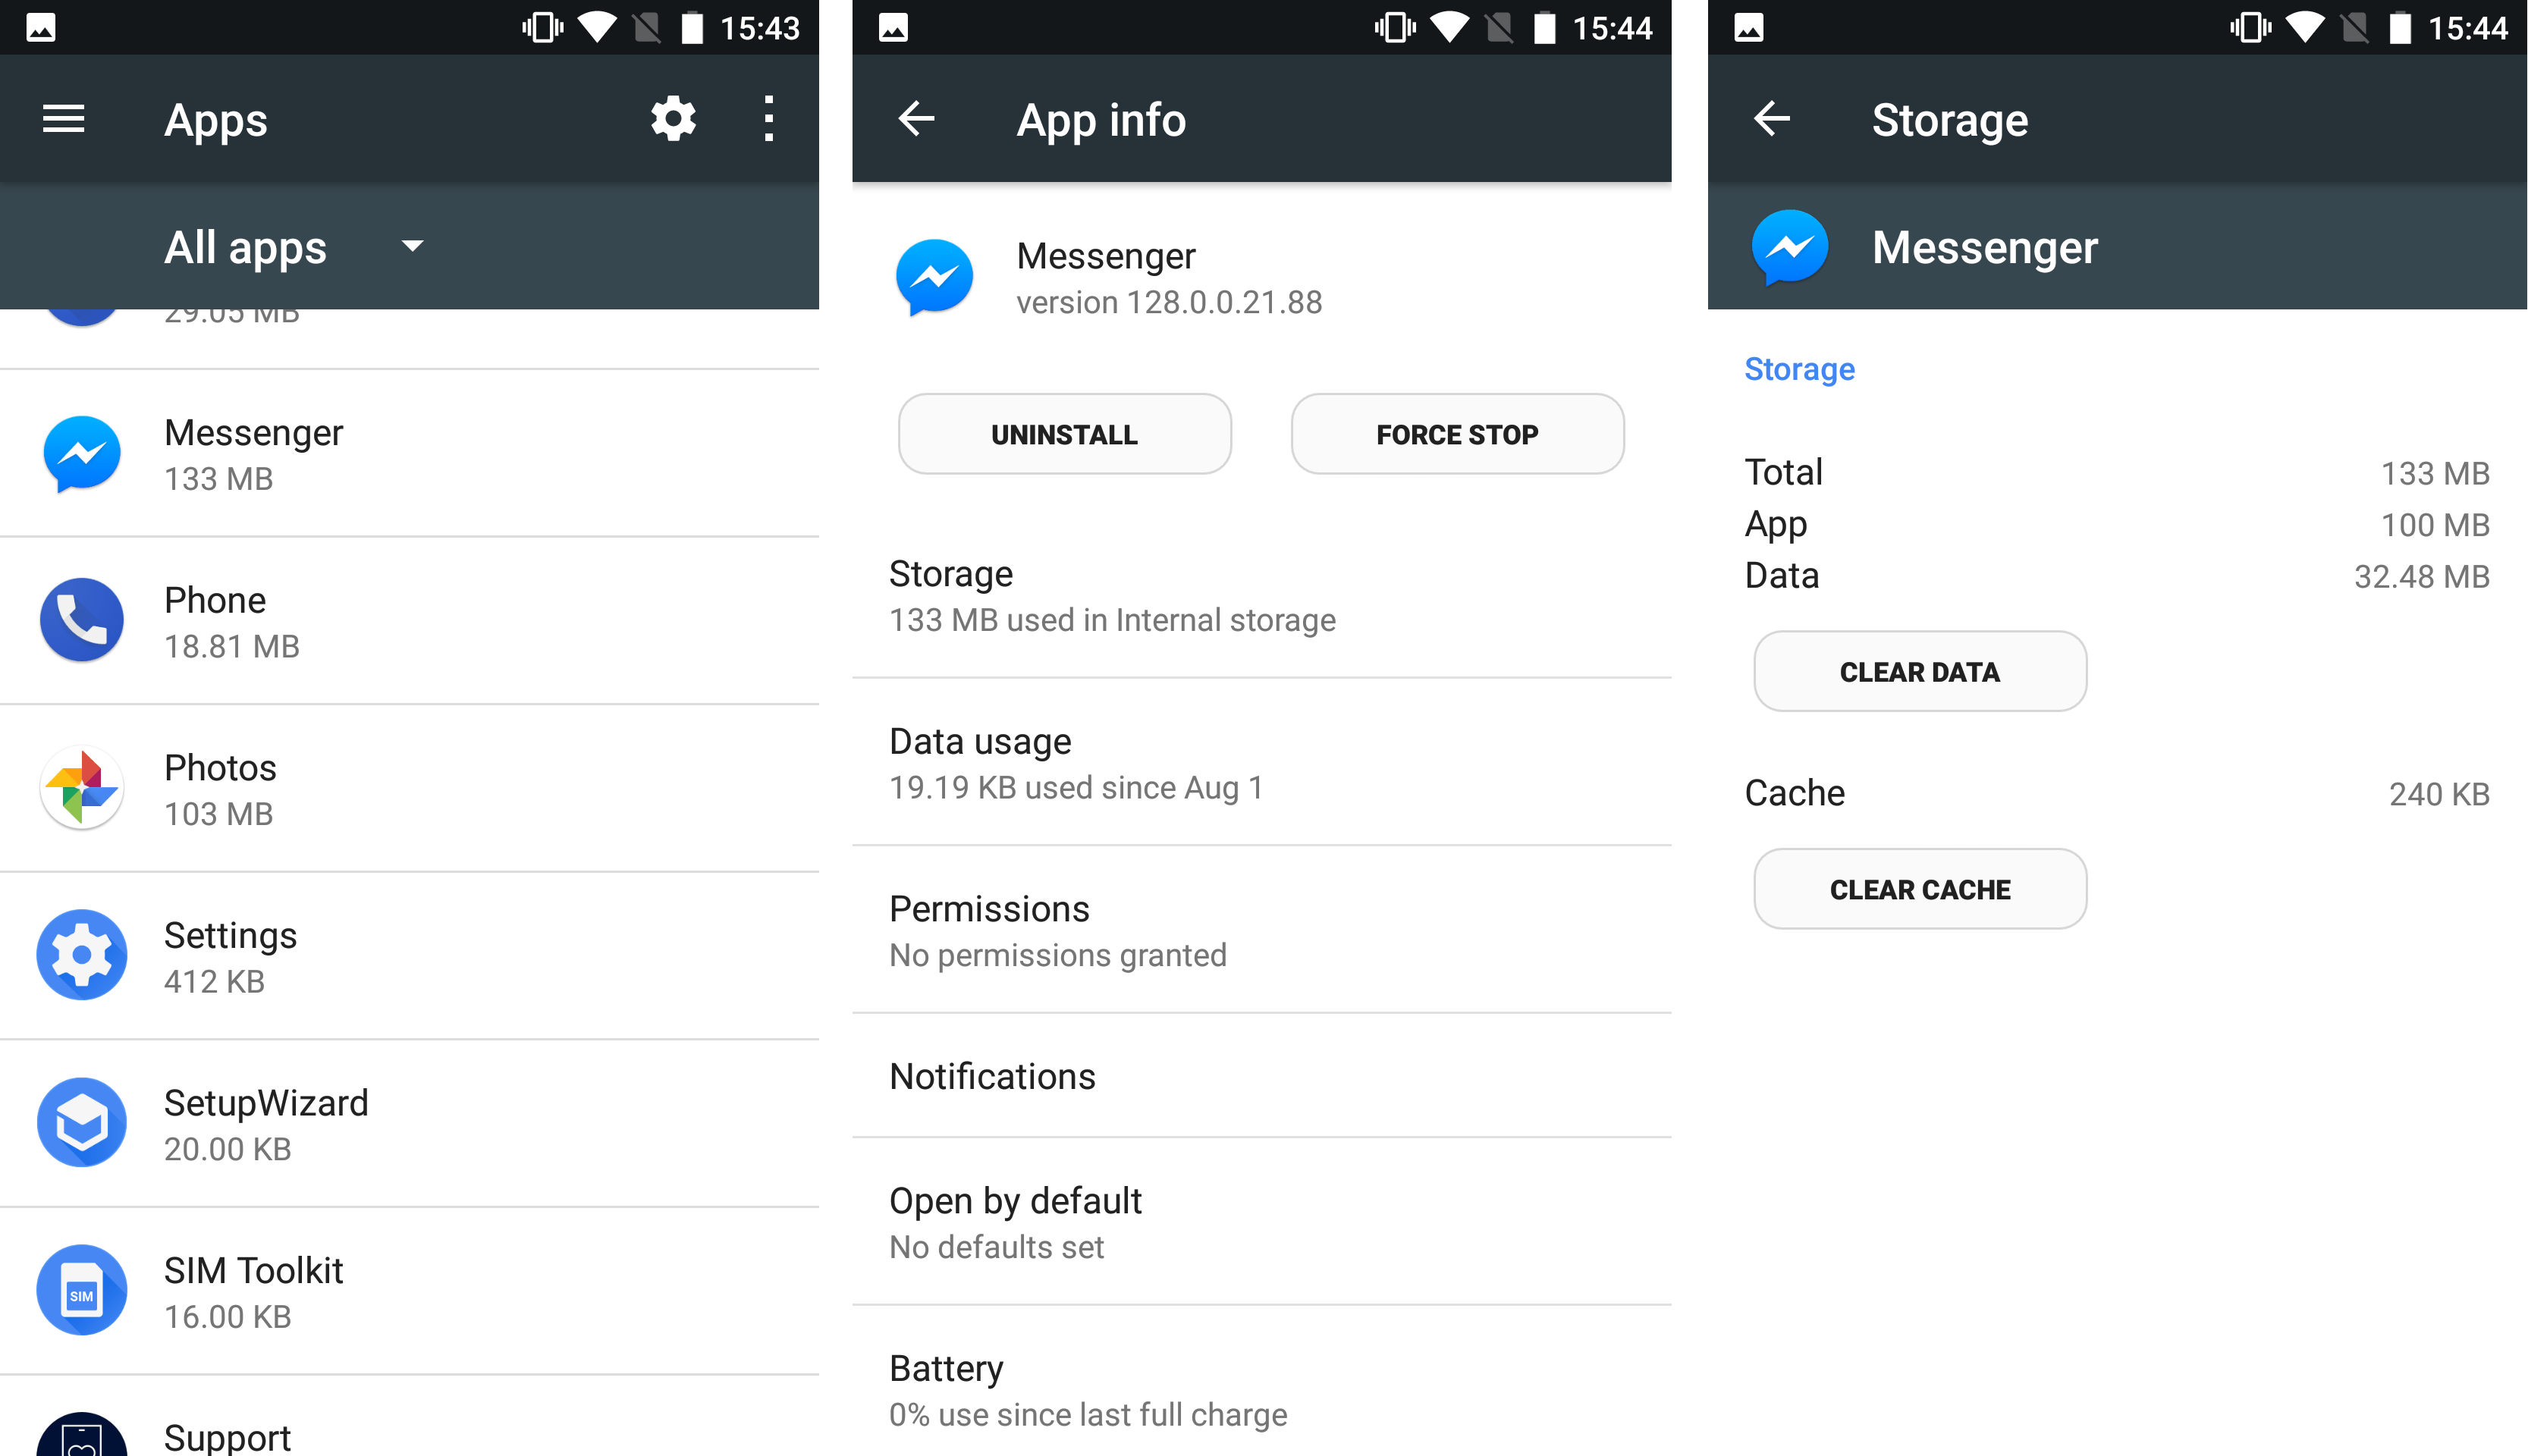 messenger app android